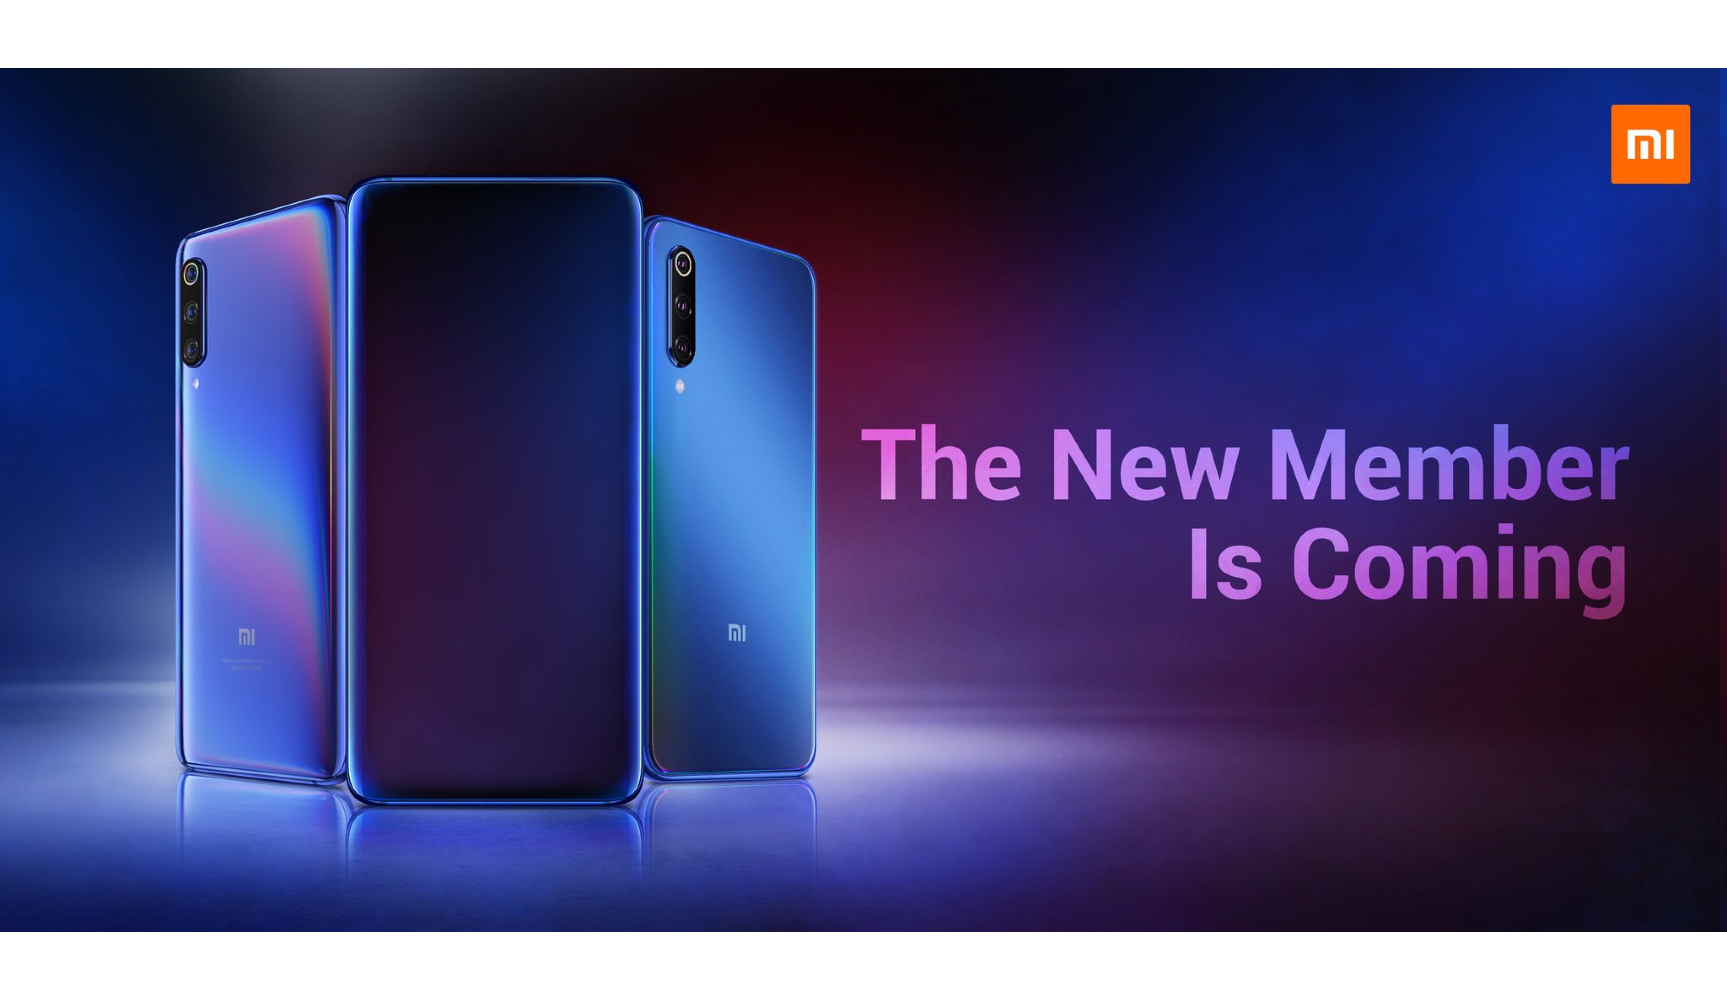 Xiaomi starts teasing Mi 9T with notchless display, triple cameras